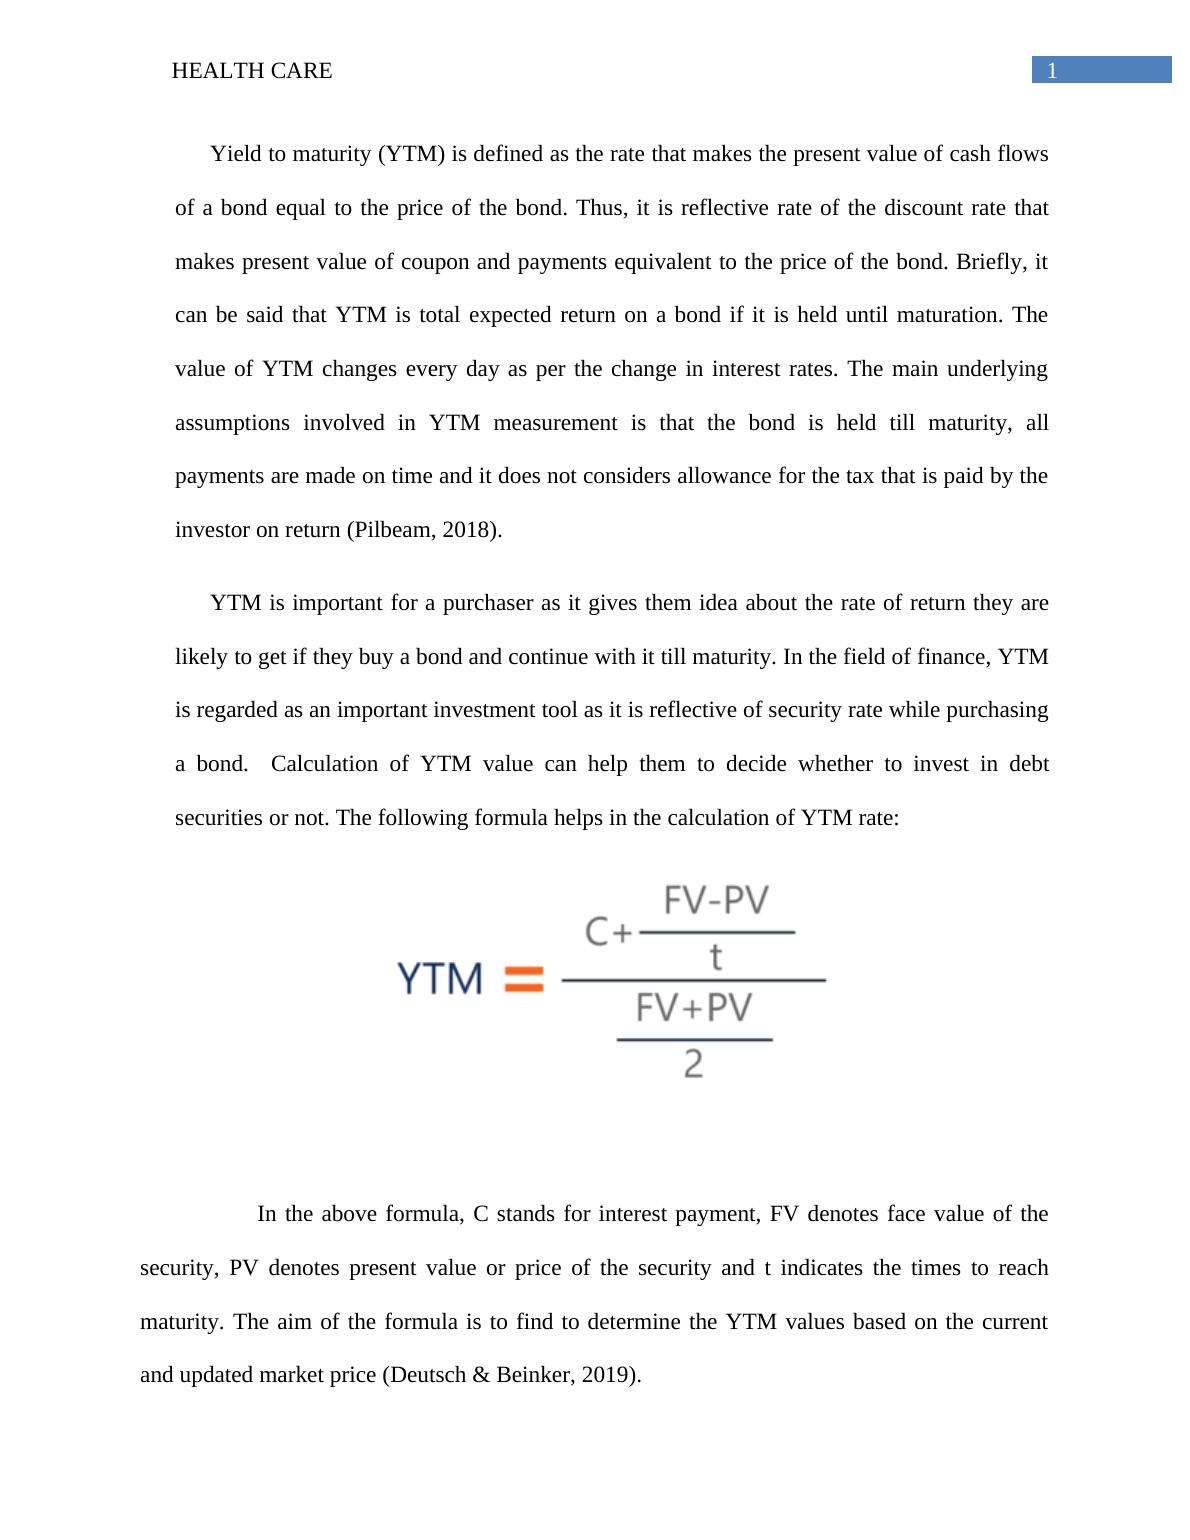 Concept of Yield to Maturity (YTM) | Report_2